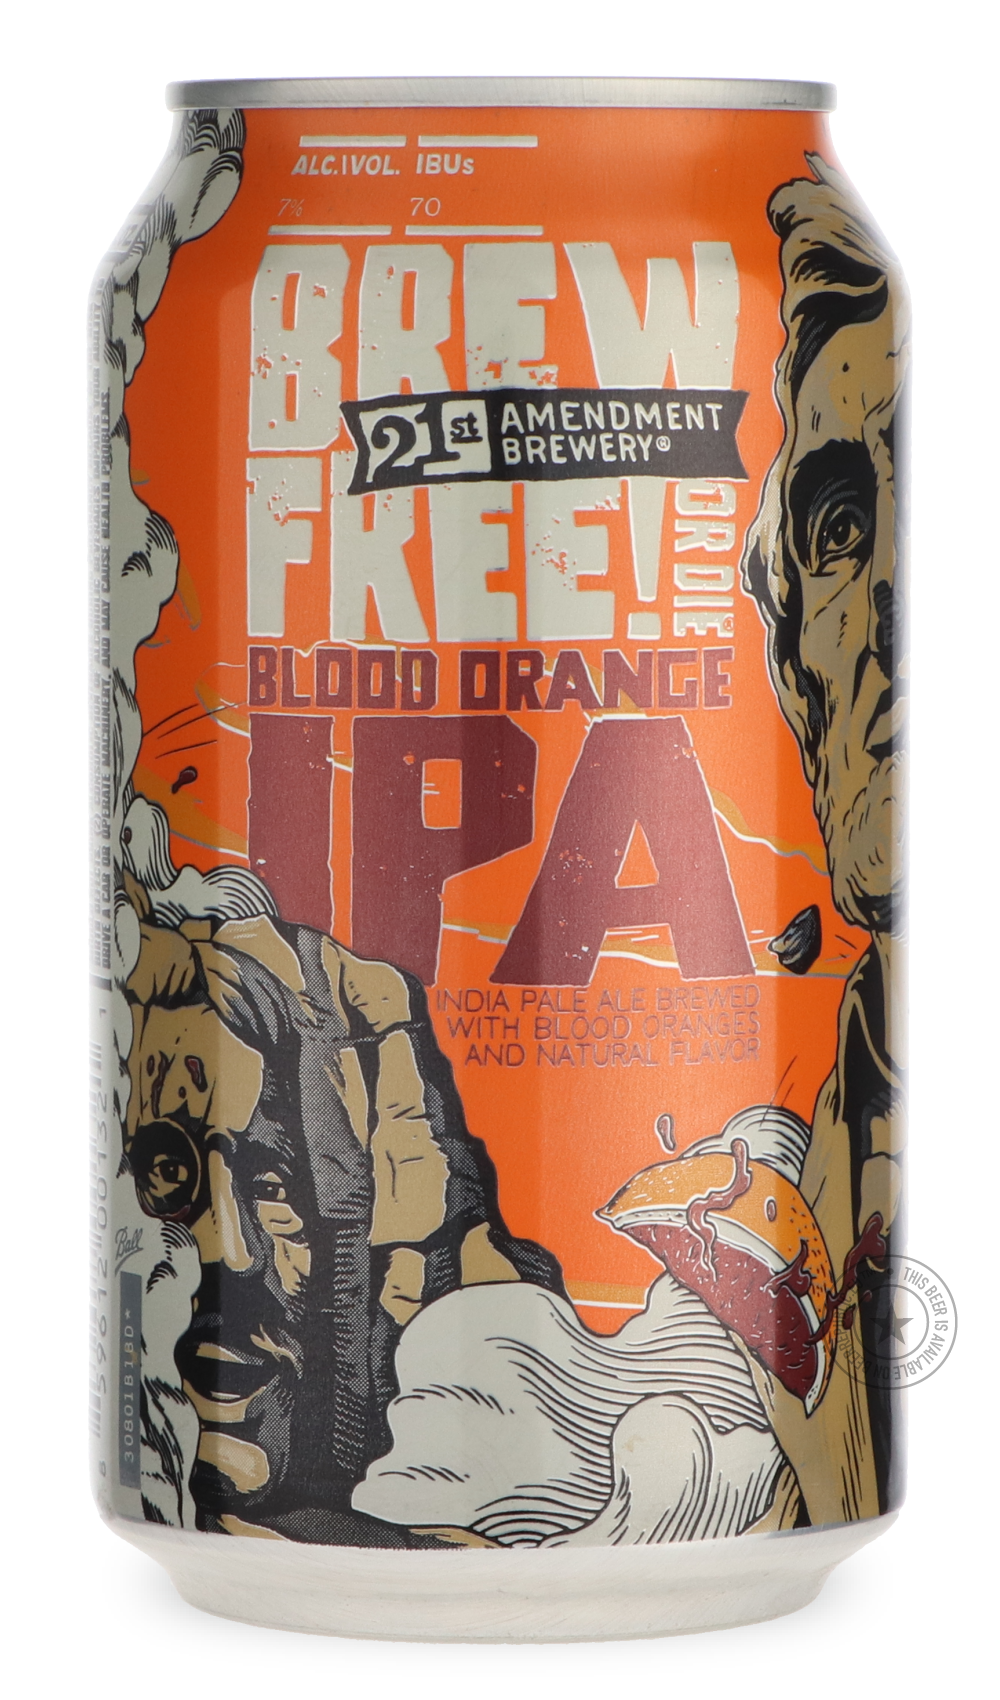 -21st Amendment- Blood Orange Brew Free! or Die-IPA- Only @ Beer Republic - The best online beer store for American & Canadian craft beer - Buy beer online from the USA and Canada - Bier online kopen - Amerikaans bier kopen - Craft beer store - Craft beer kopen - Amerikanisch bier kaufen - Bier online kaufen - Acheter biere online - IPA - Stout - Porter - New England IPA - Hazy IPA - Imperial Stout - Barrel Aged - Barrel Aged Imperial Stout - Brown - Dark beer - Blond - Blonde - Pilsner - Lager - Wheat - We